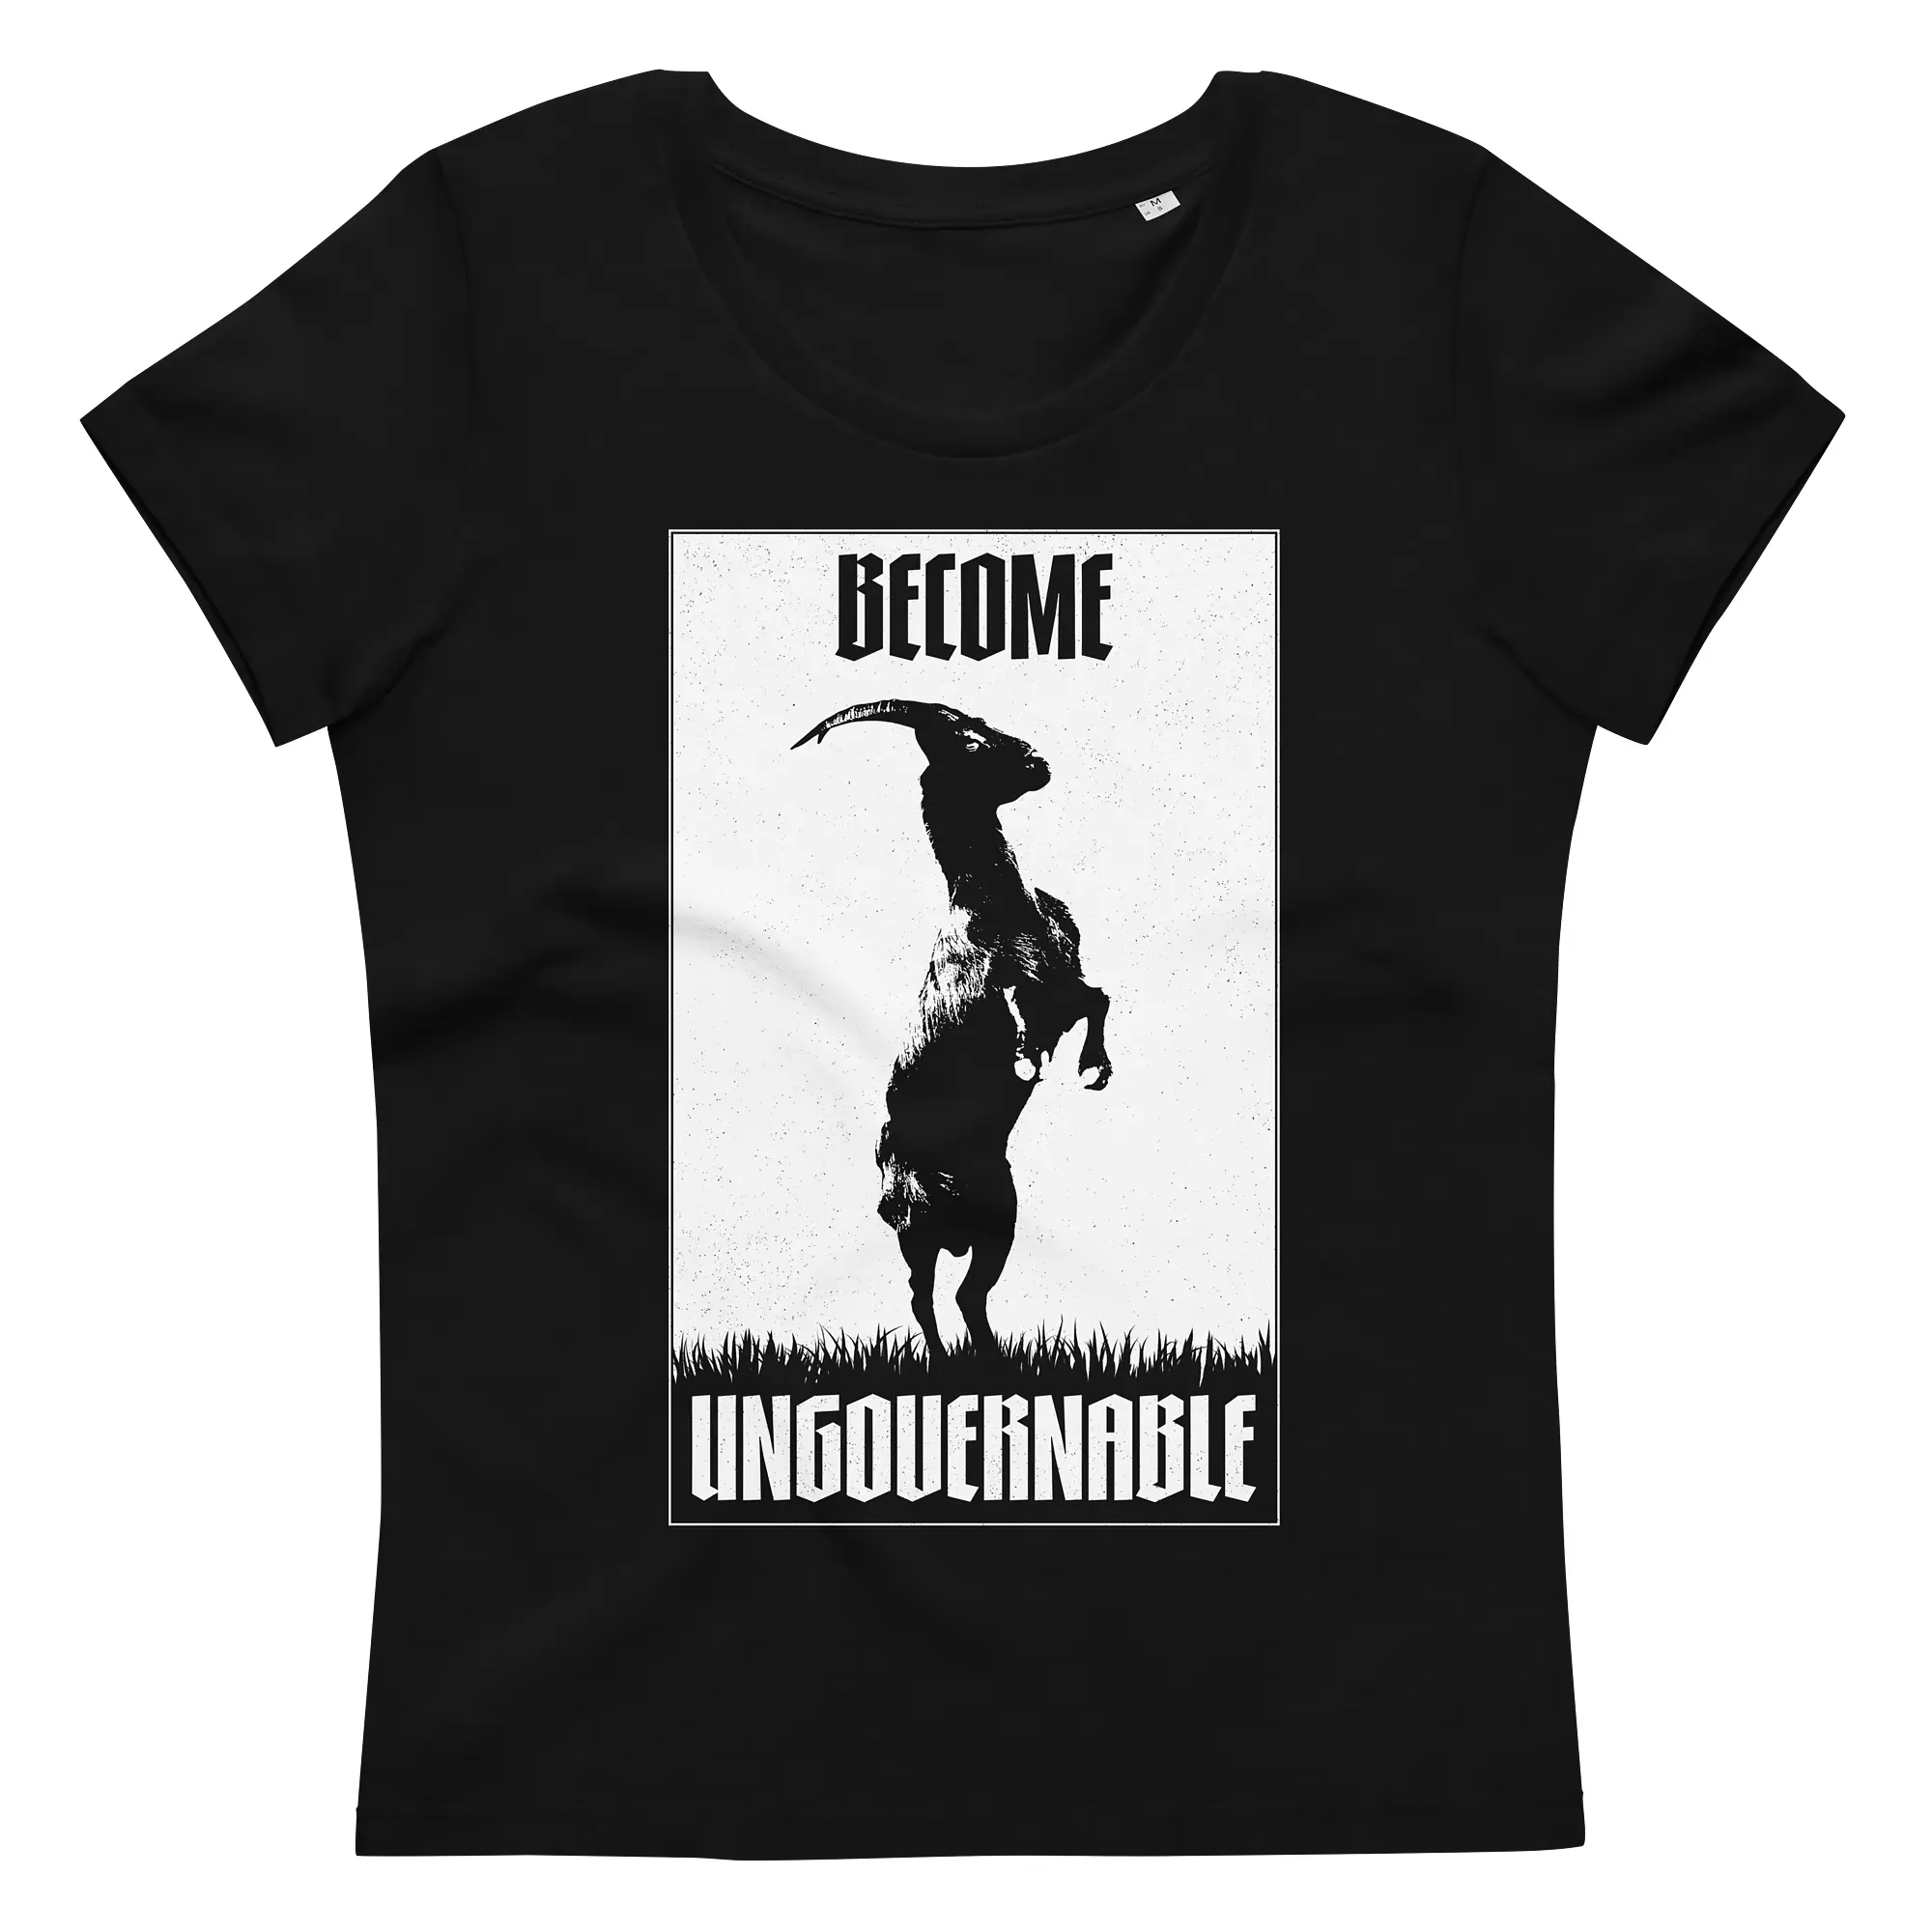 “Become Ungovernable” standing goat b&w tee